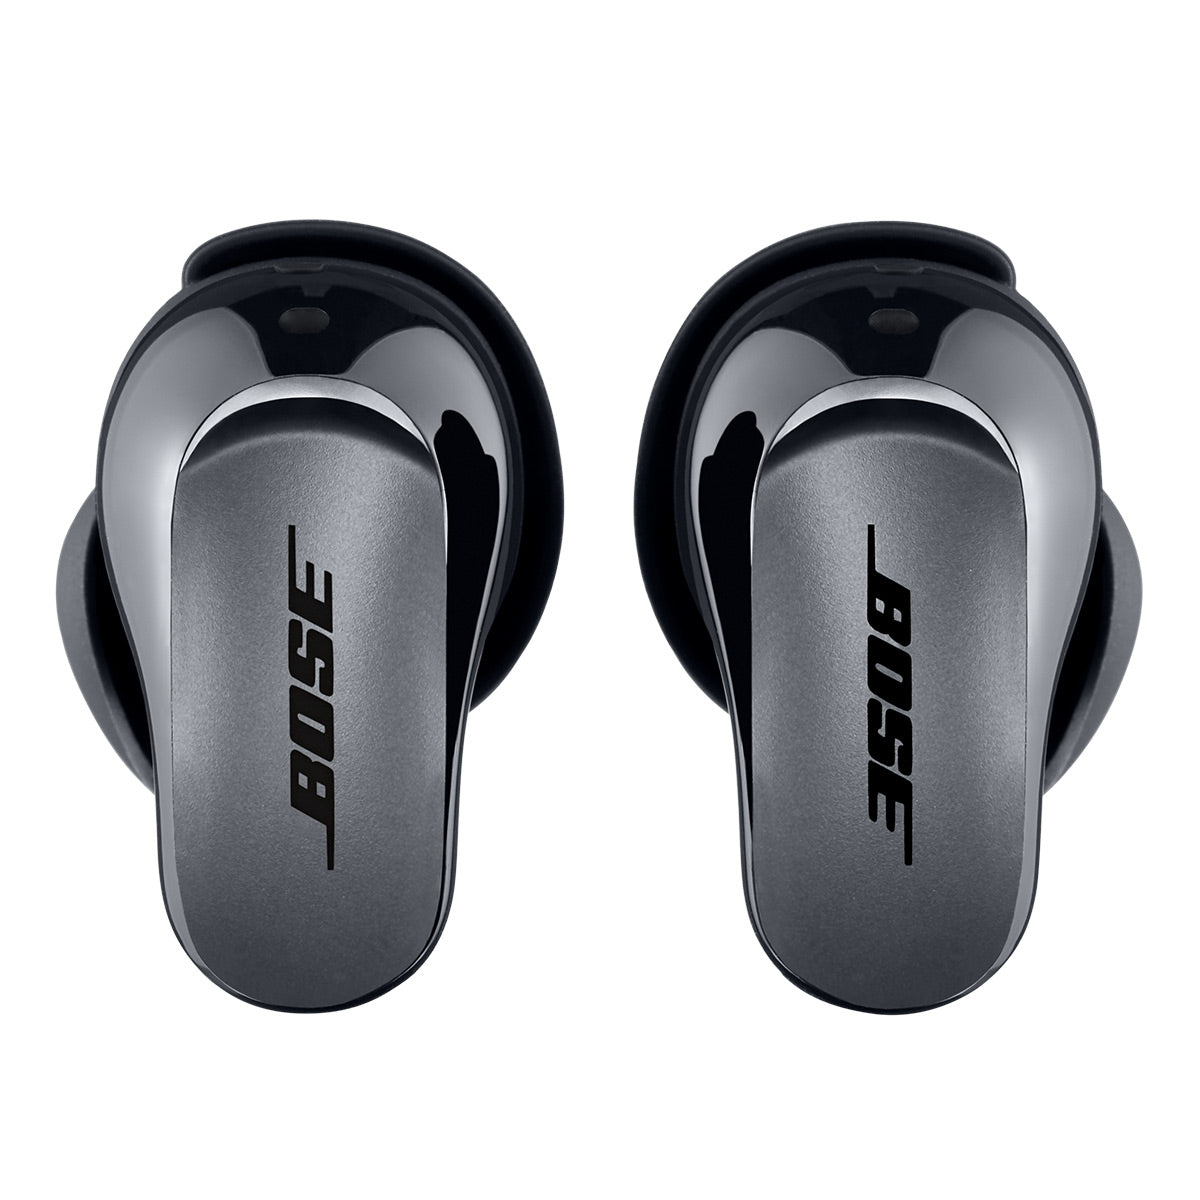 Bose QuietComfort Ultra Wireless Noise Cancelling Earbuds - Pair (Black)